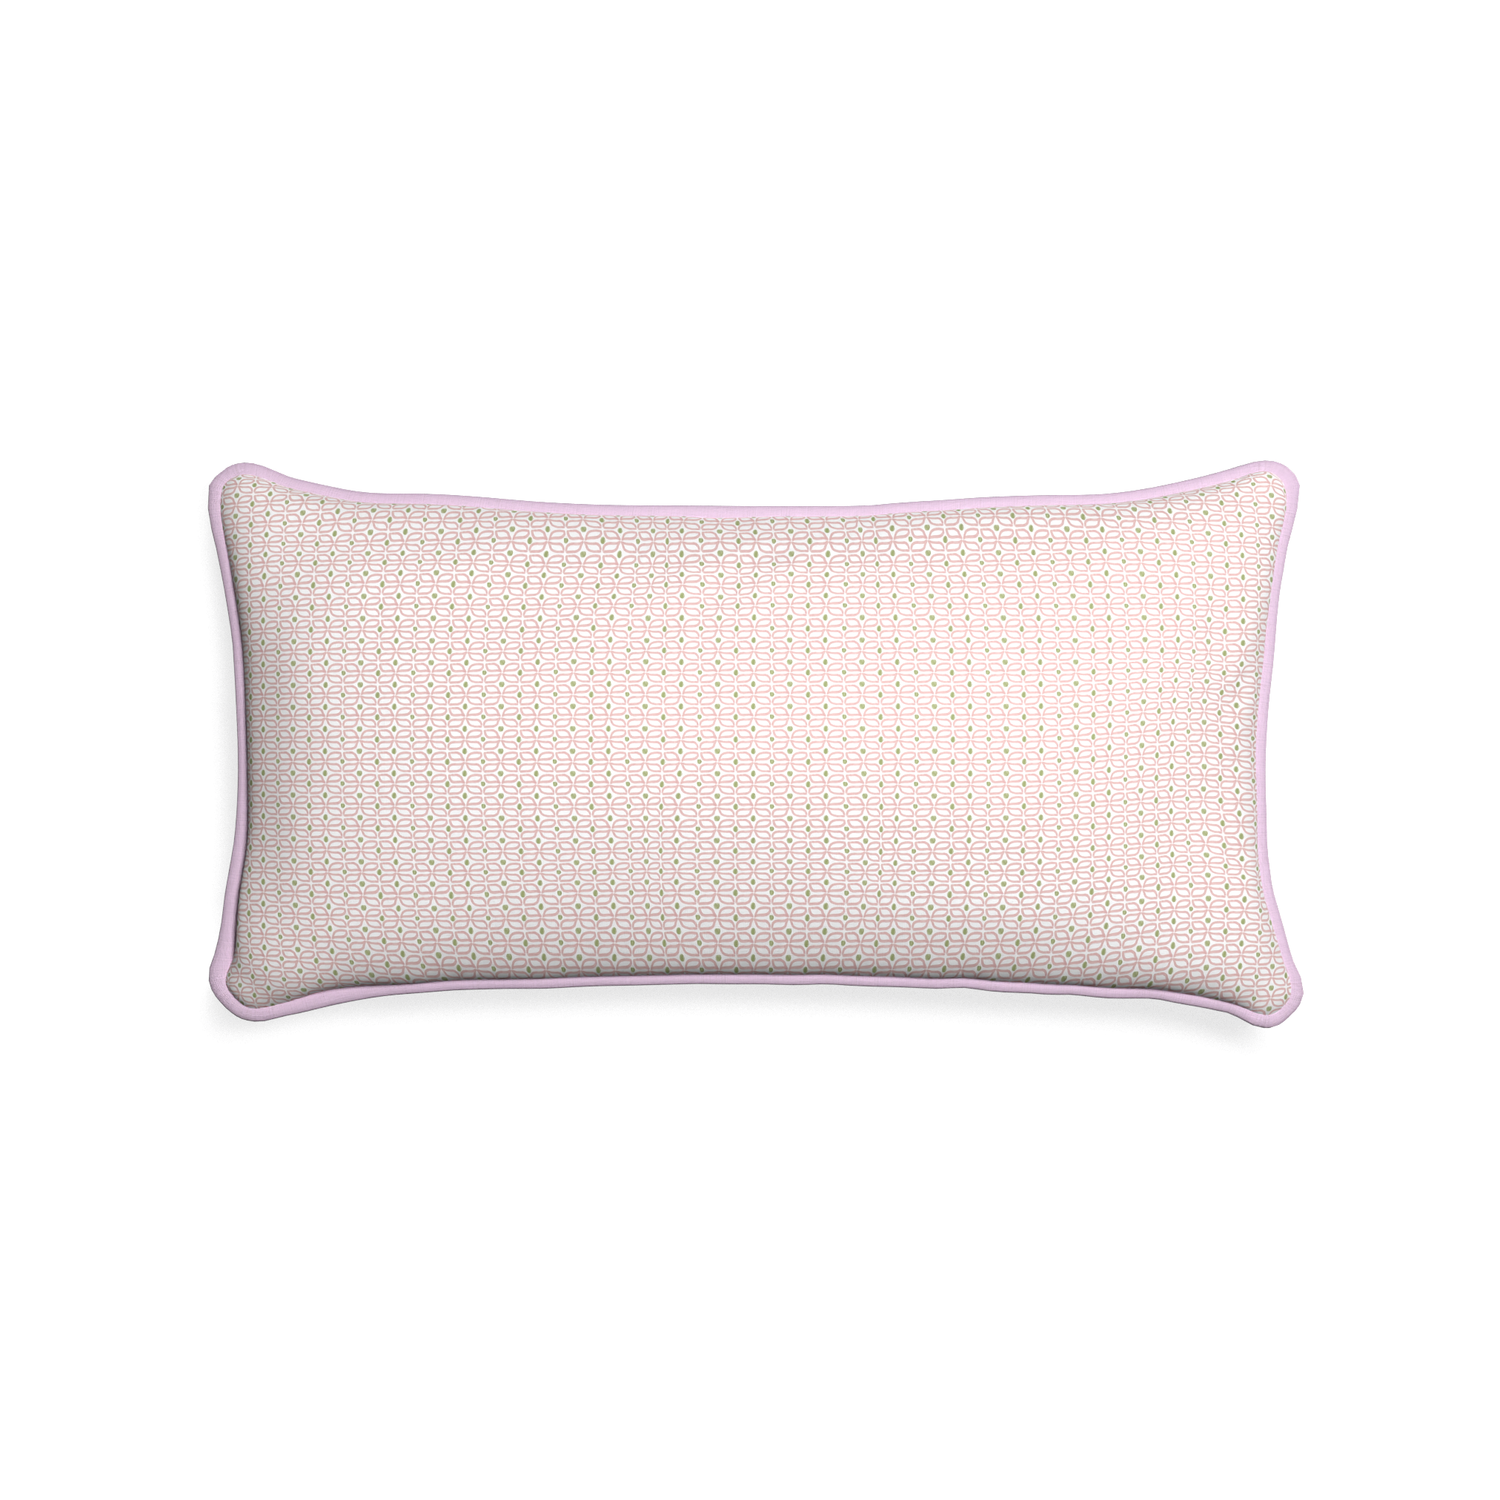 Midi-lumbar loomi pink custom pink geometricpillow with l piping on white background